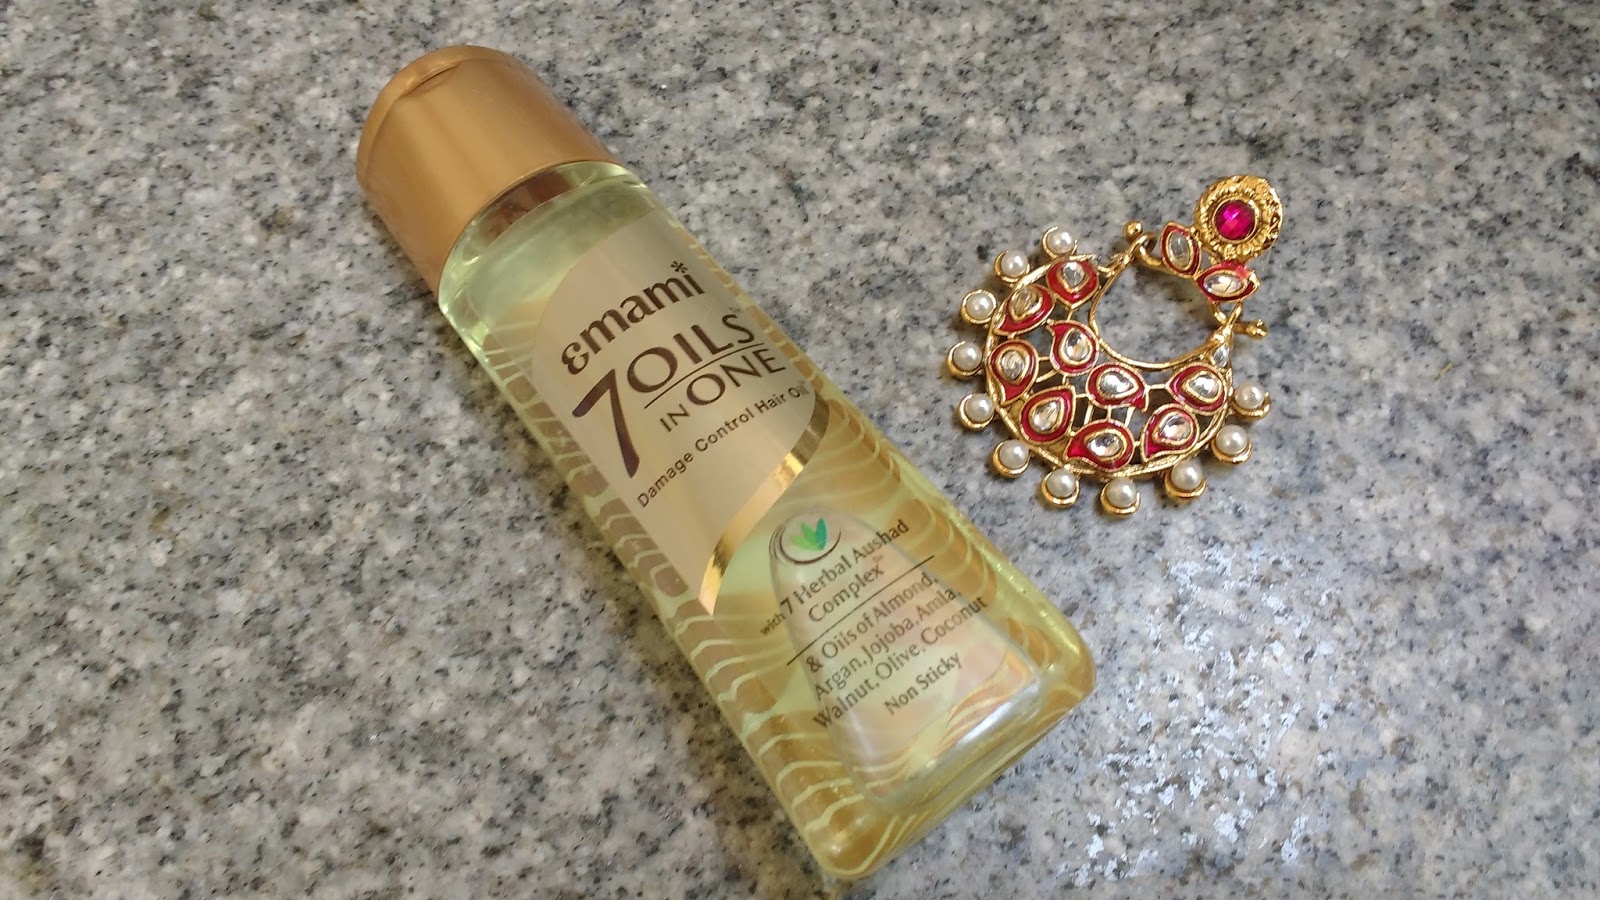 Emami 7 Oils In One Damage Control Hair Oil Review